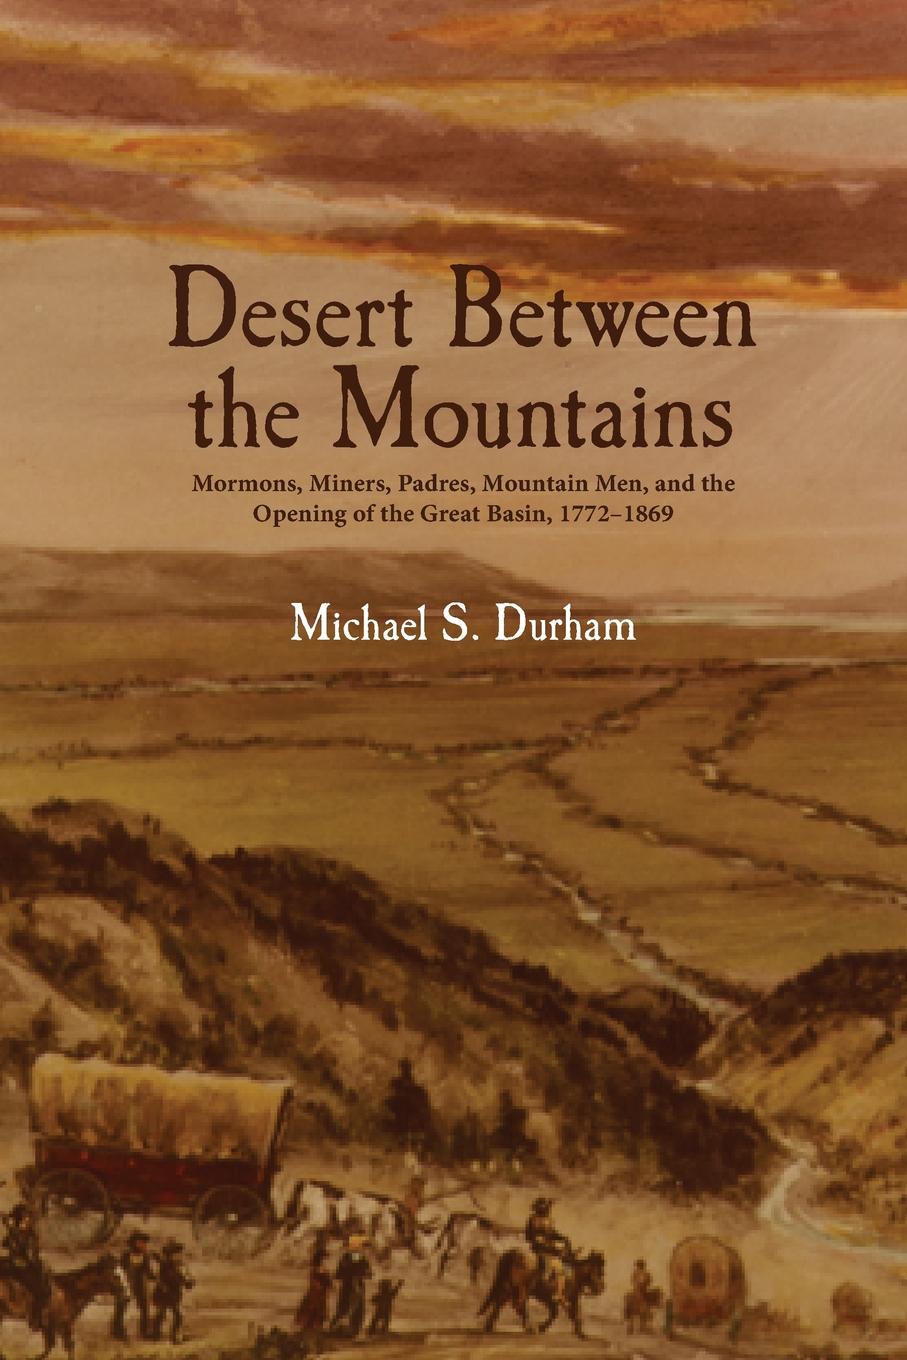 Desert Between the Mountains. Mormons, Miners, Padres, Mountain Men, and the Opening of the Great Basin, 1772-1869